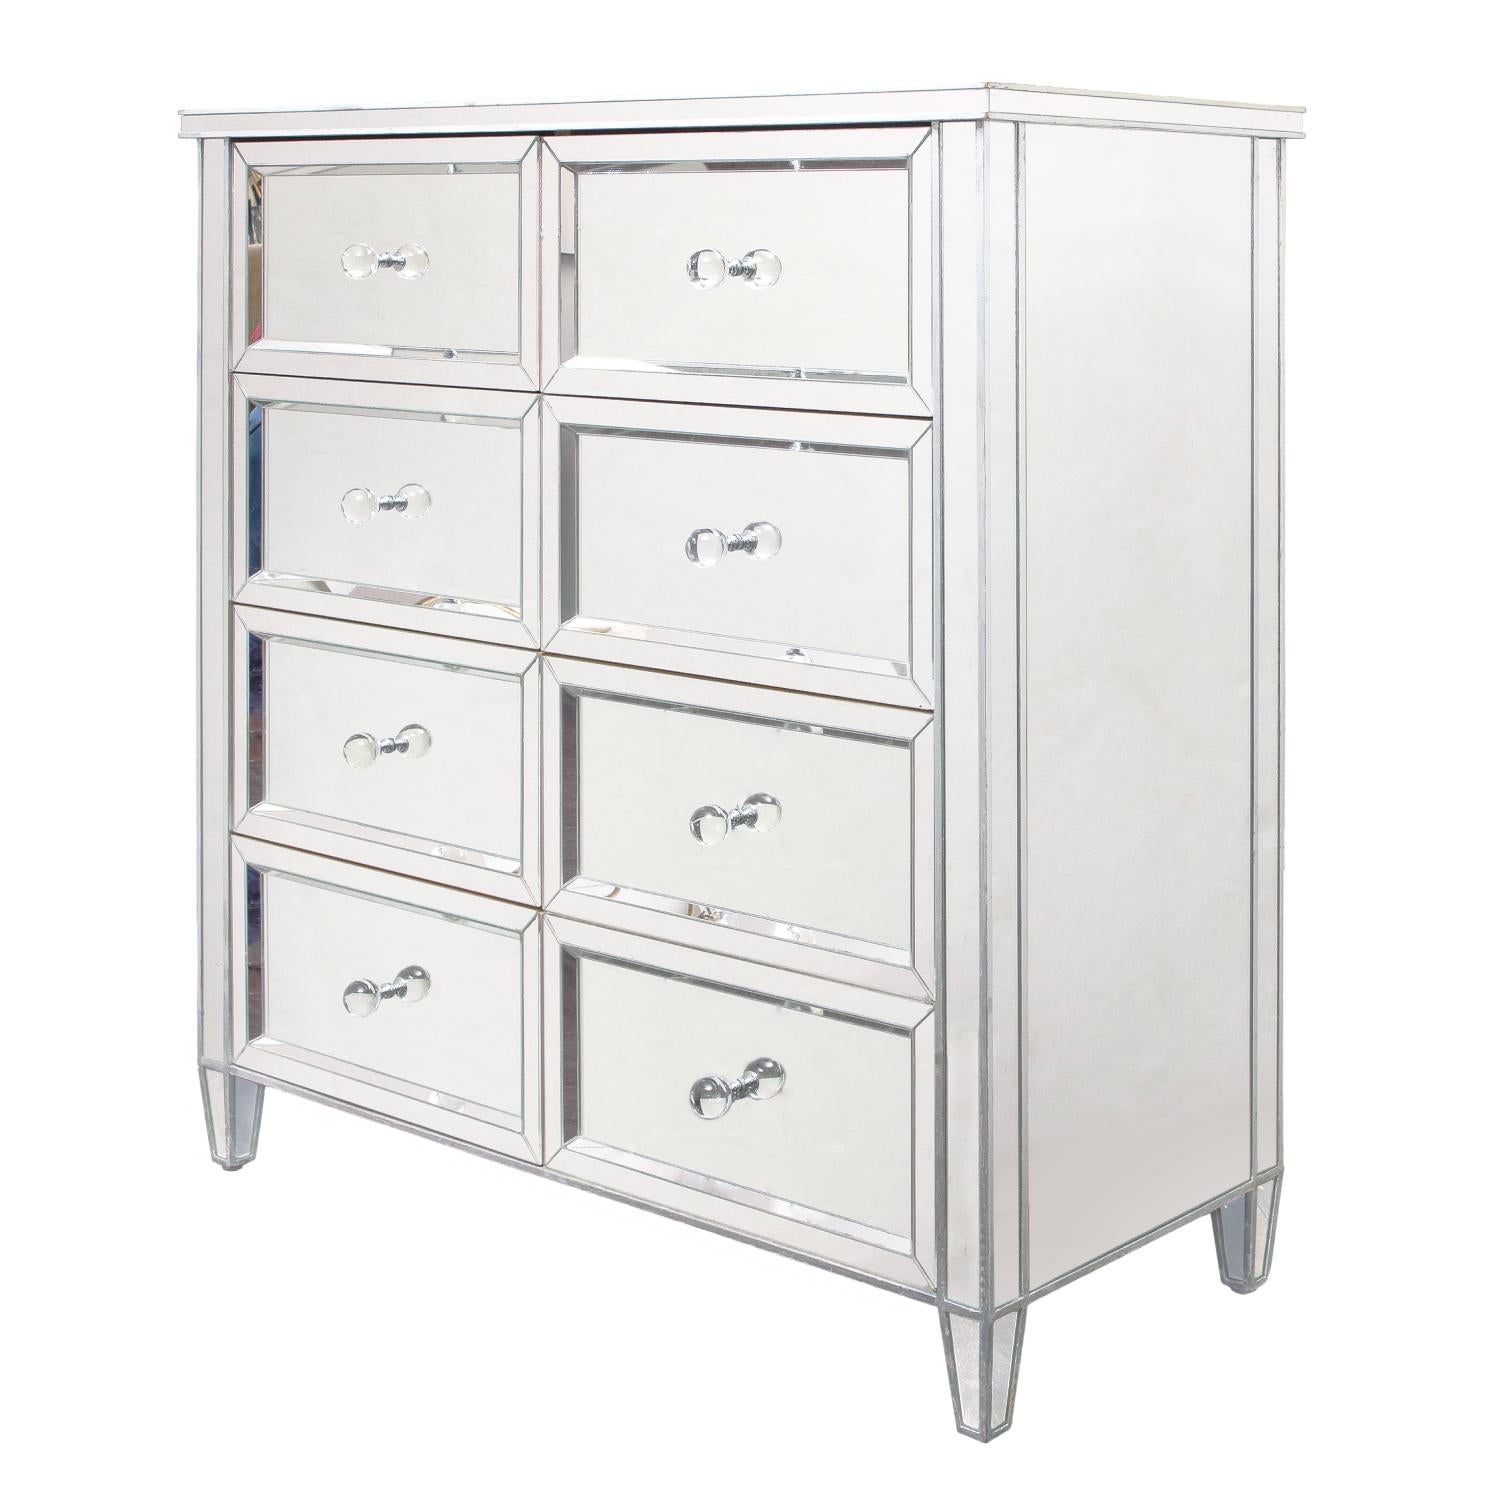 Chic mirrored 8-drawer highboy dresser with painted silver trim and crystal ball knobs. All drawers are 17.5